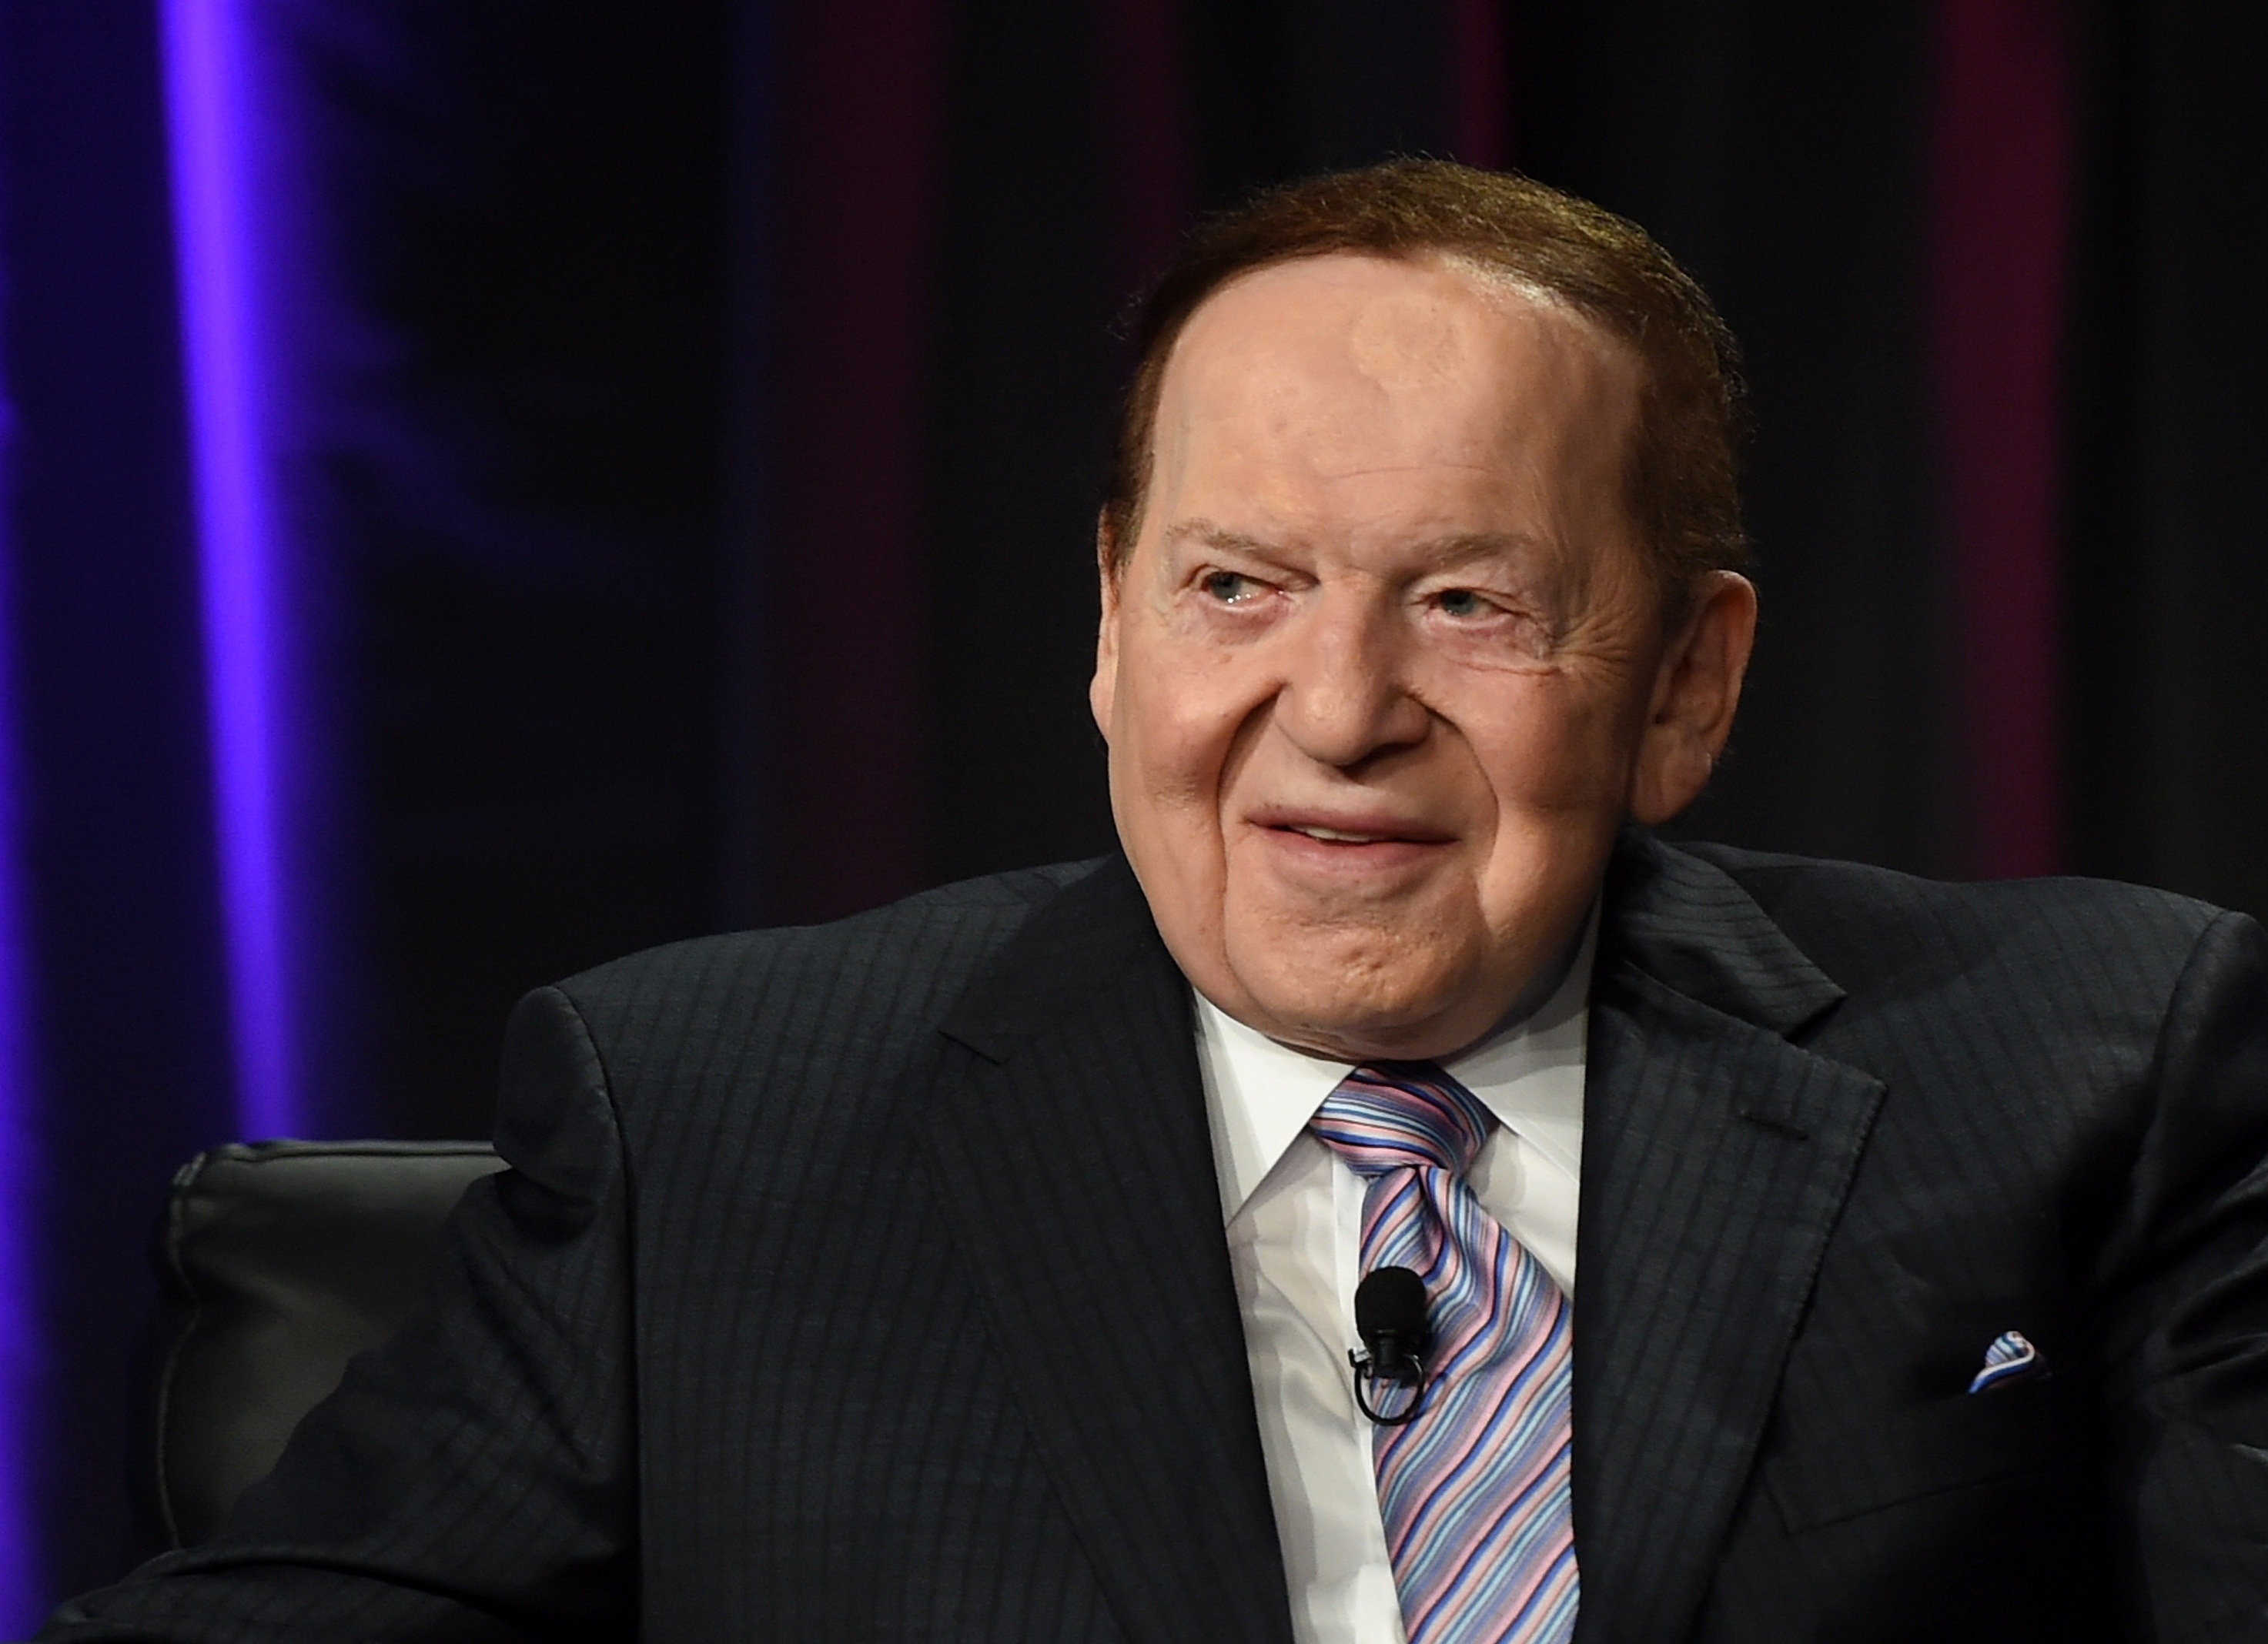 Adelson ‘gives up’ on Japan casino project